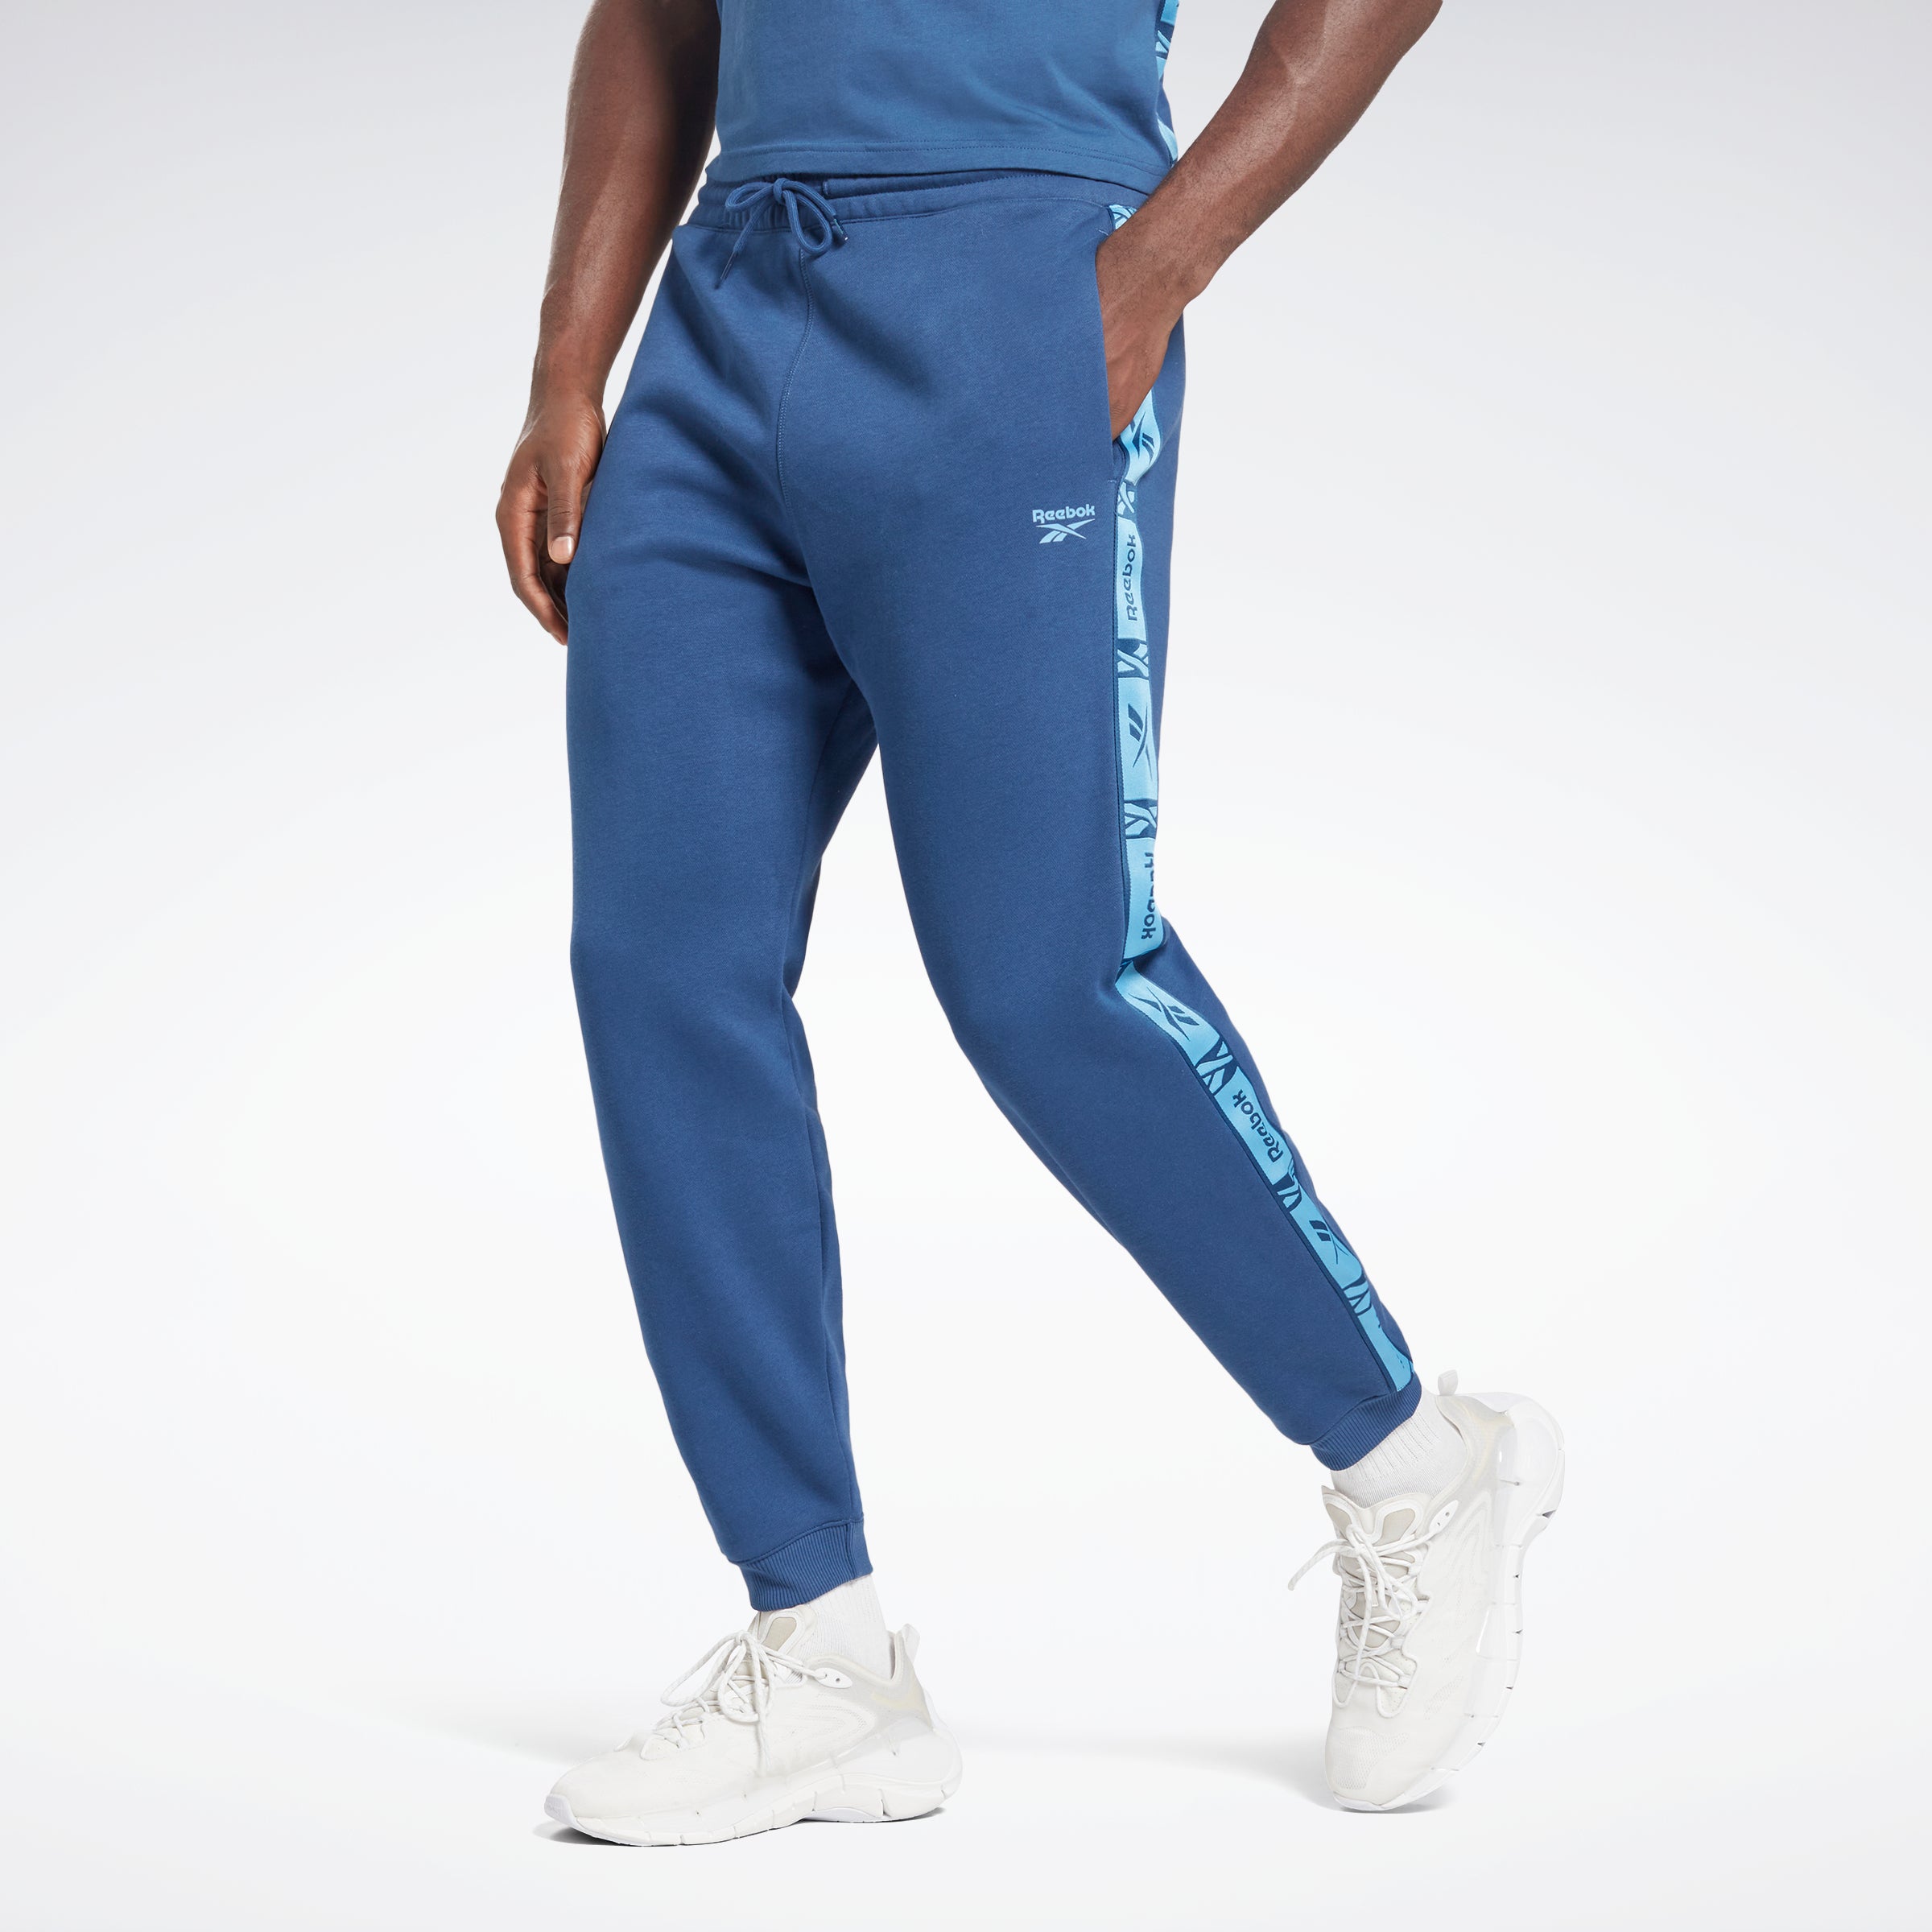 Reebok Mens Training Core Knit Pants Price Starting From Rs 1,709. Find  Verified Sellers in Valsad - JdMart